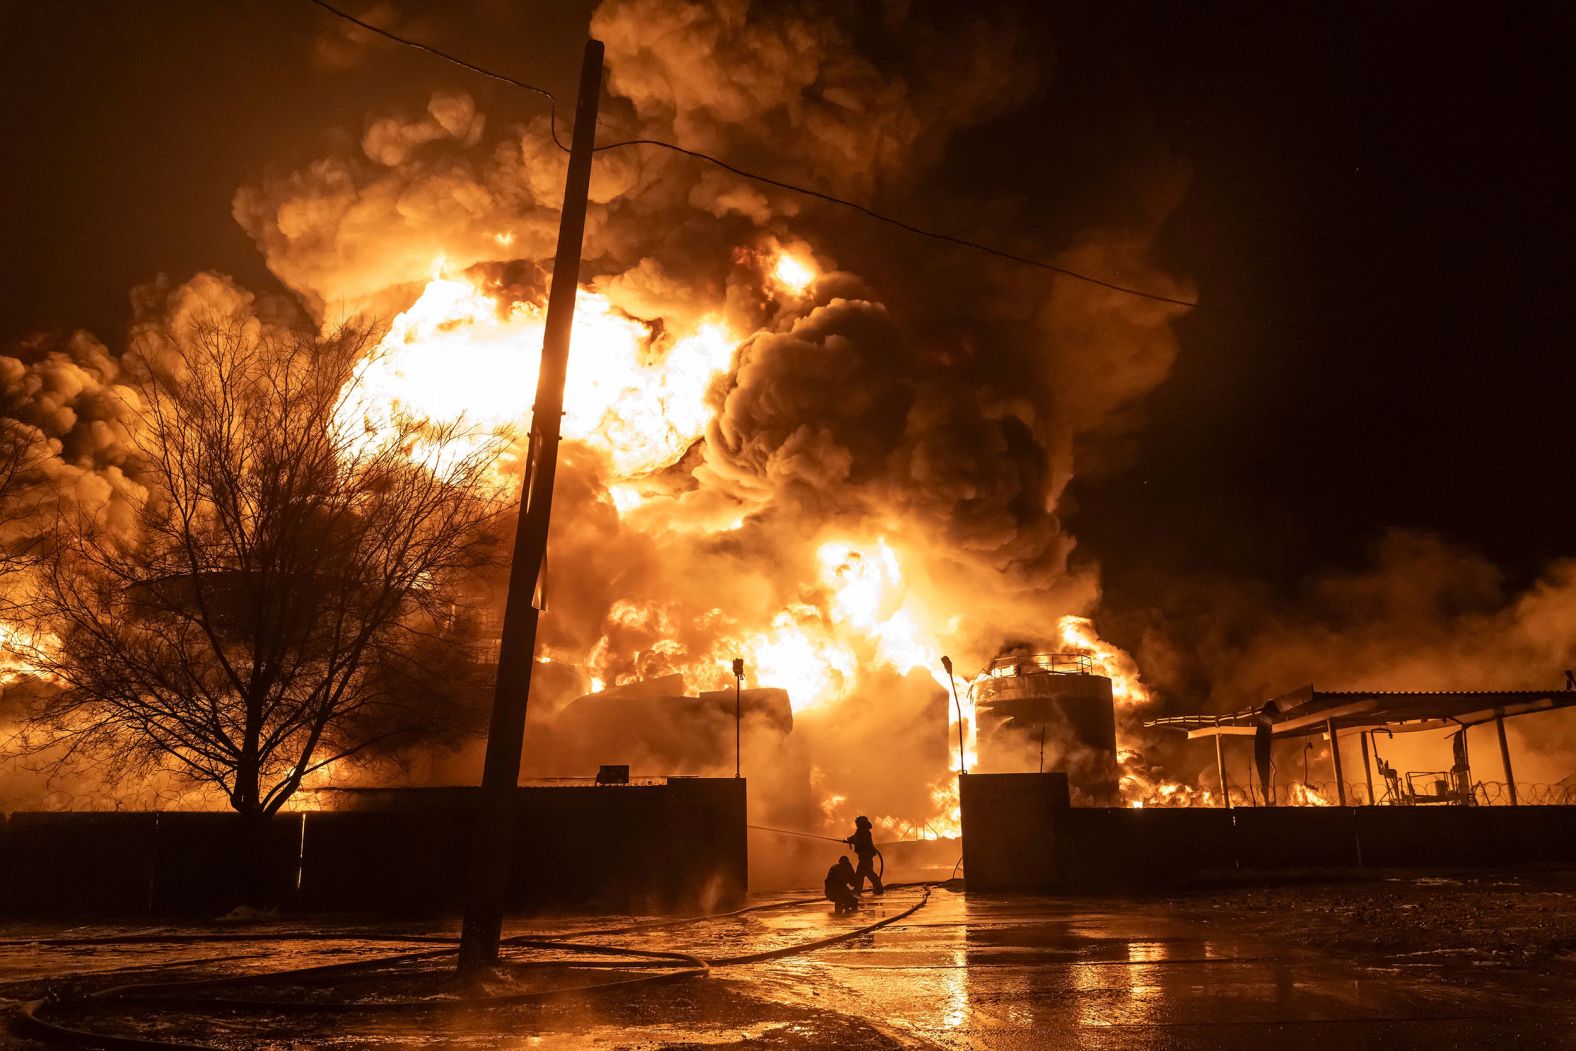 Firefighters in Kharkiv, Ukraine, extinguish flames in a residential neighborhood after a Russian attack on Saturday, February 10. It has been nearly two years since Russia invaded Ukraine, starting a war that continues today.